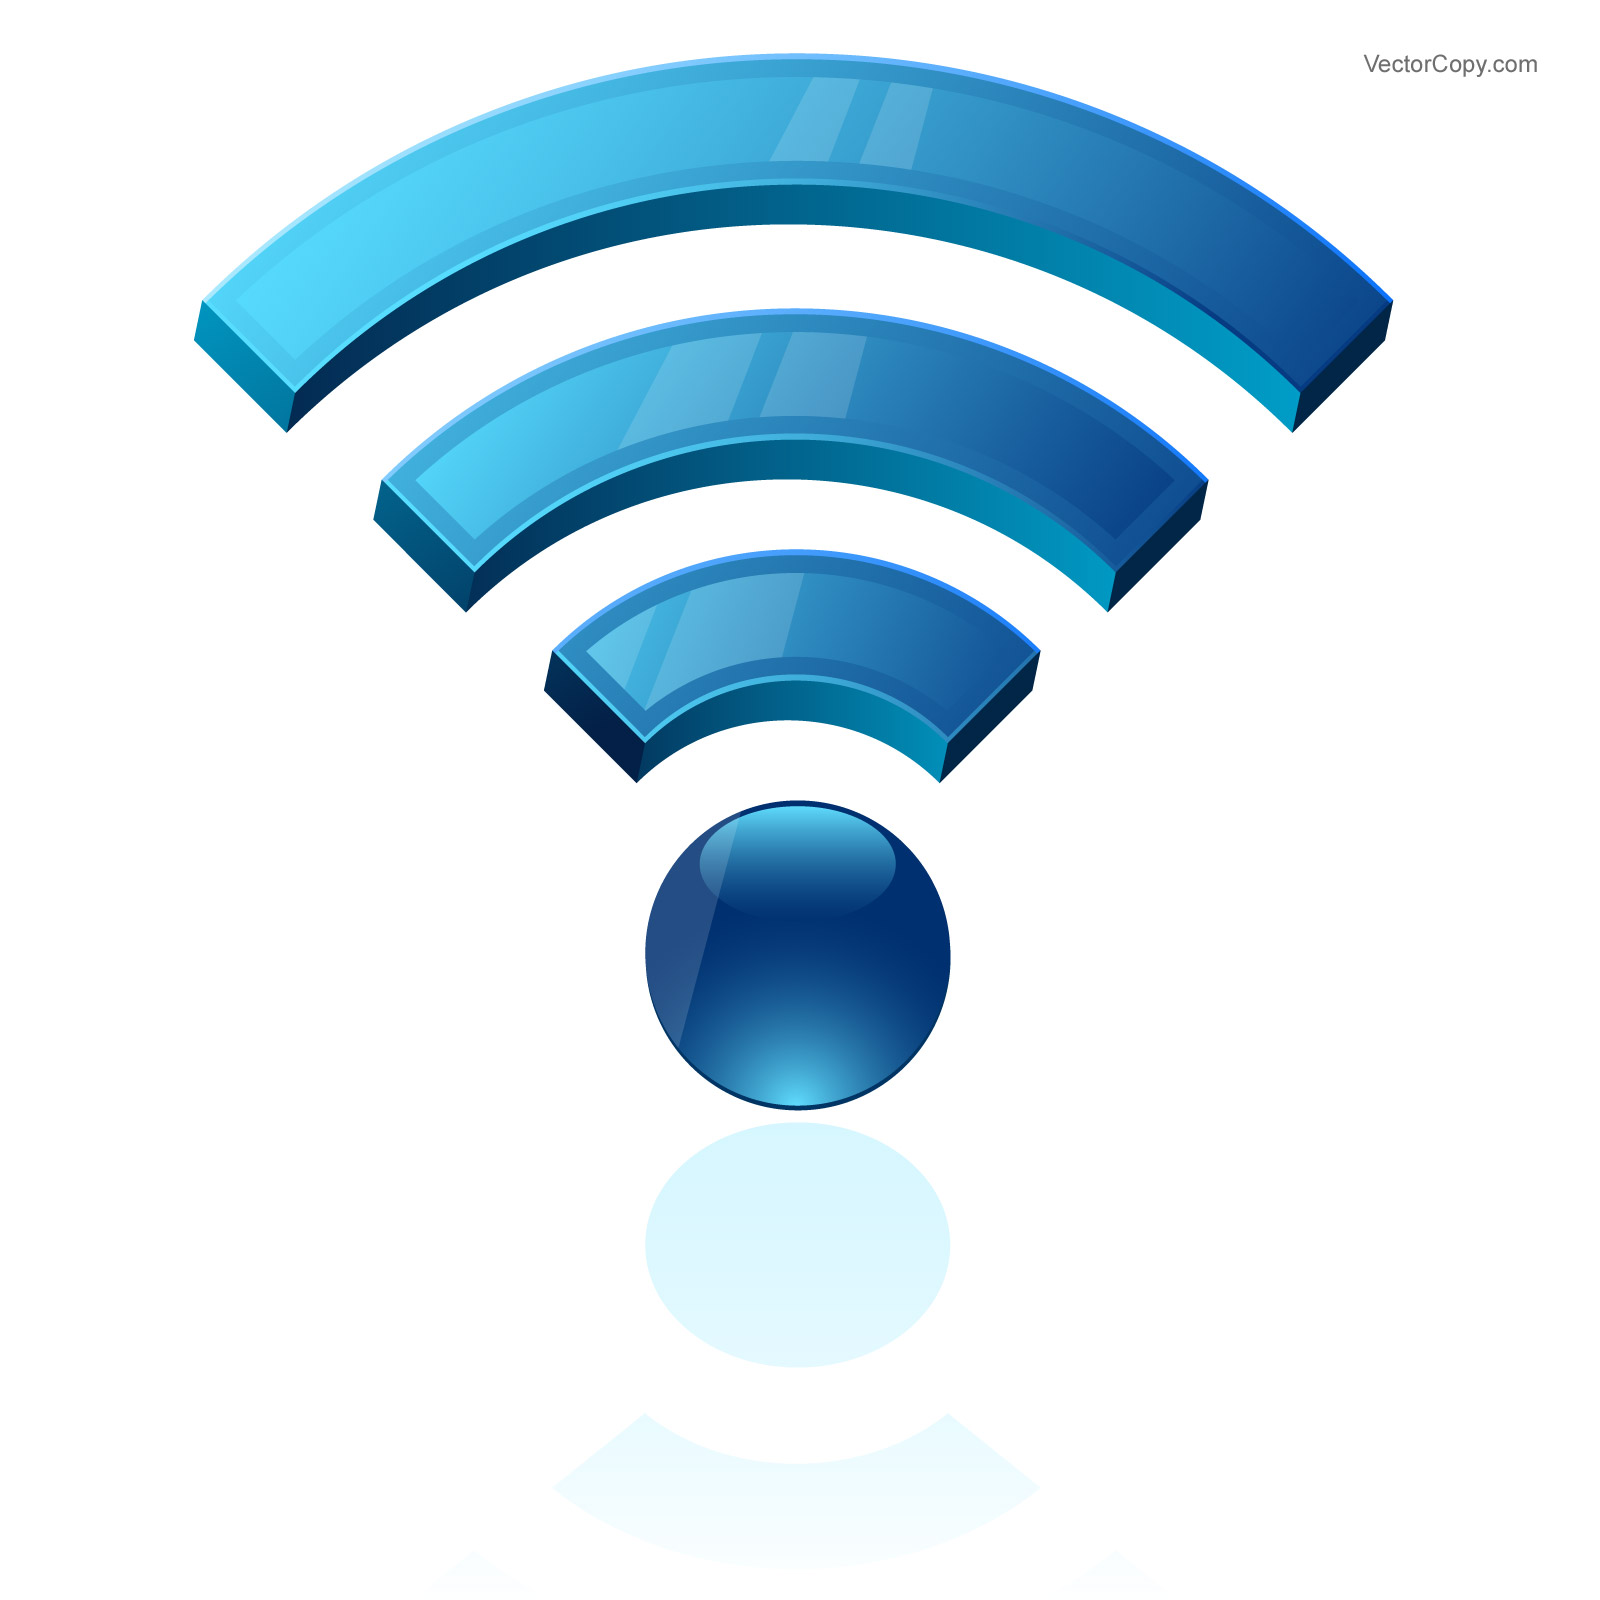 network connect icon